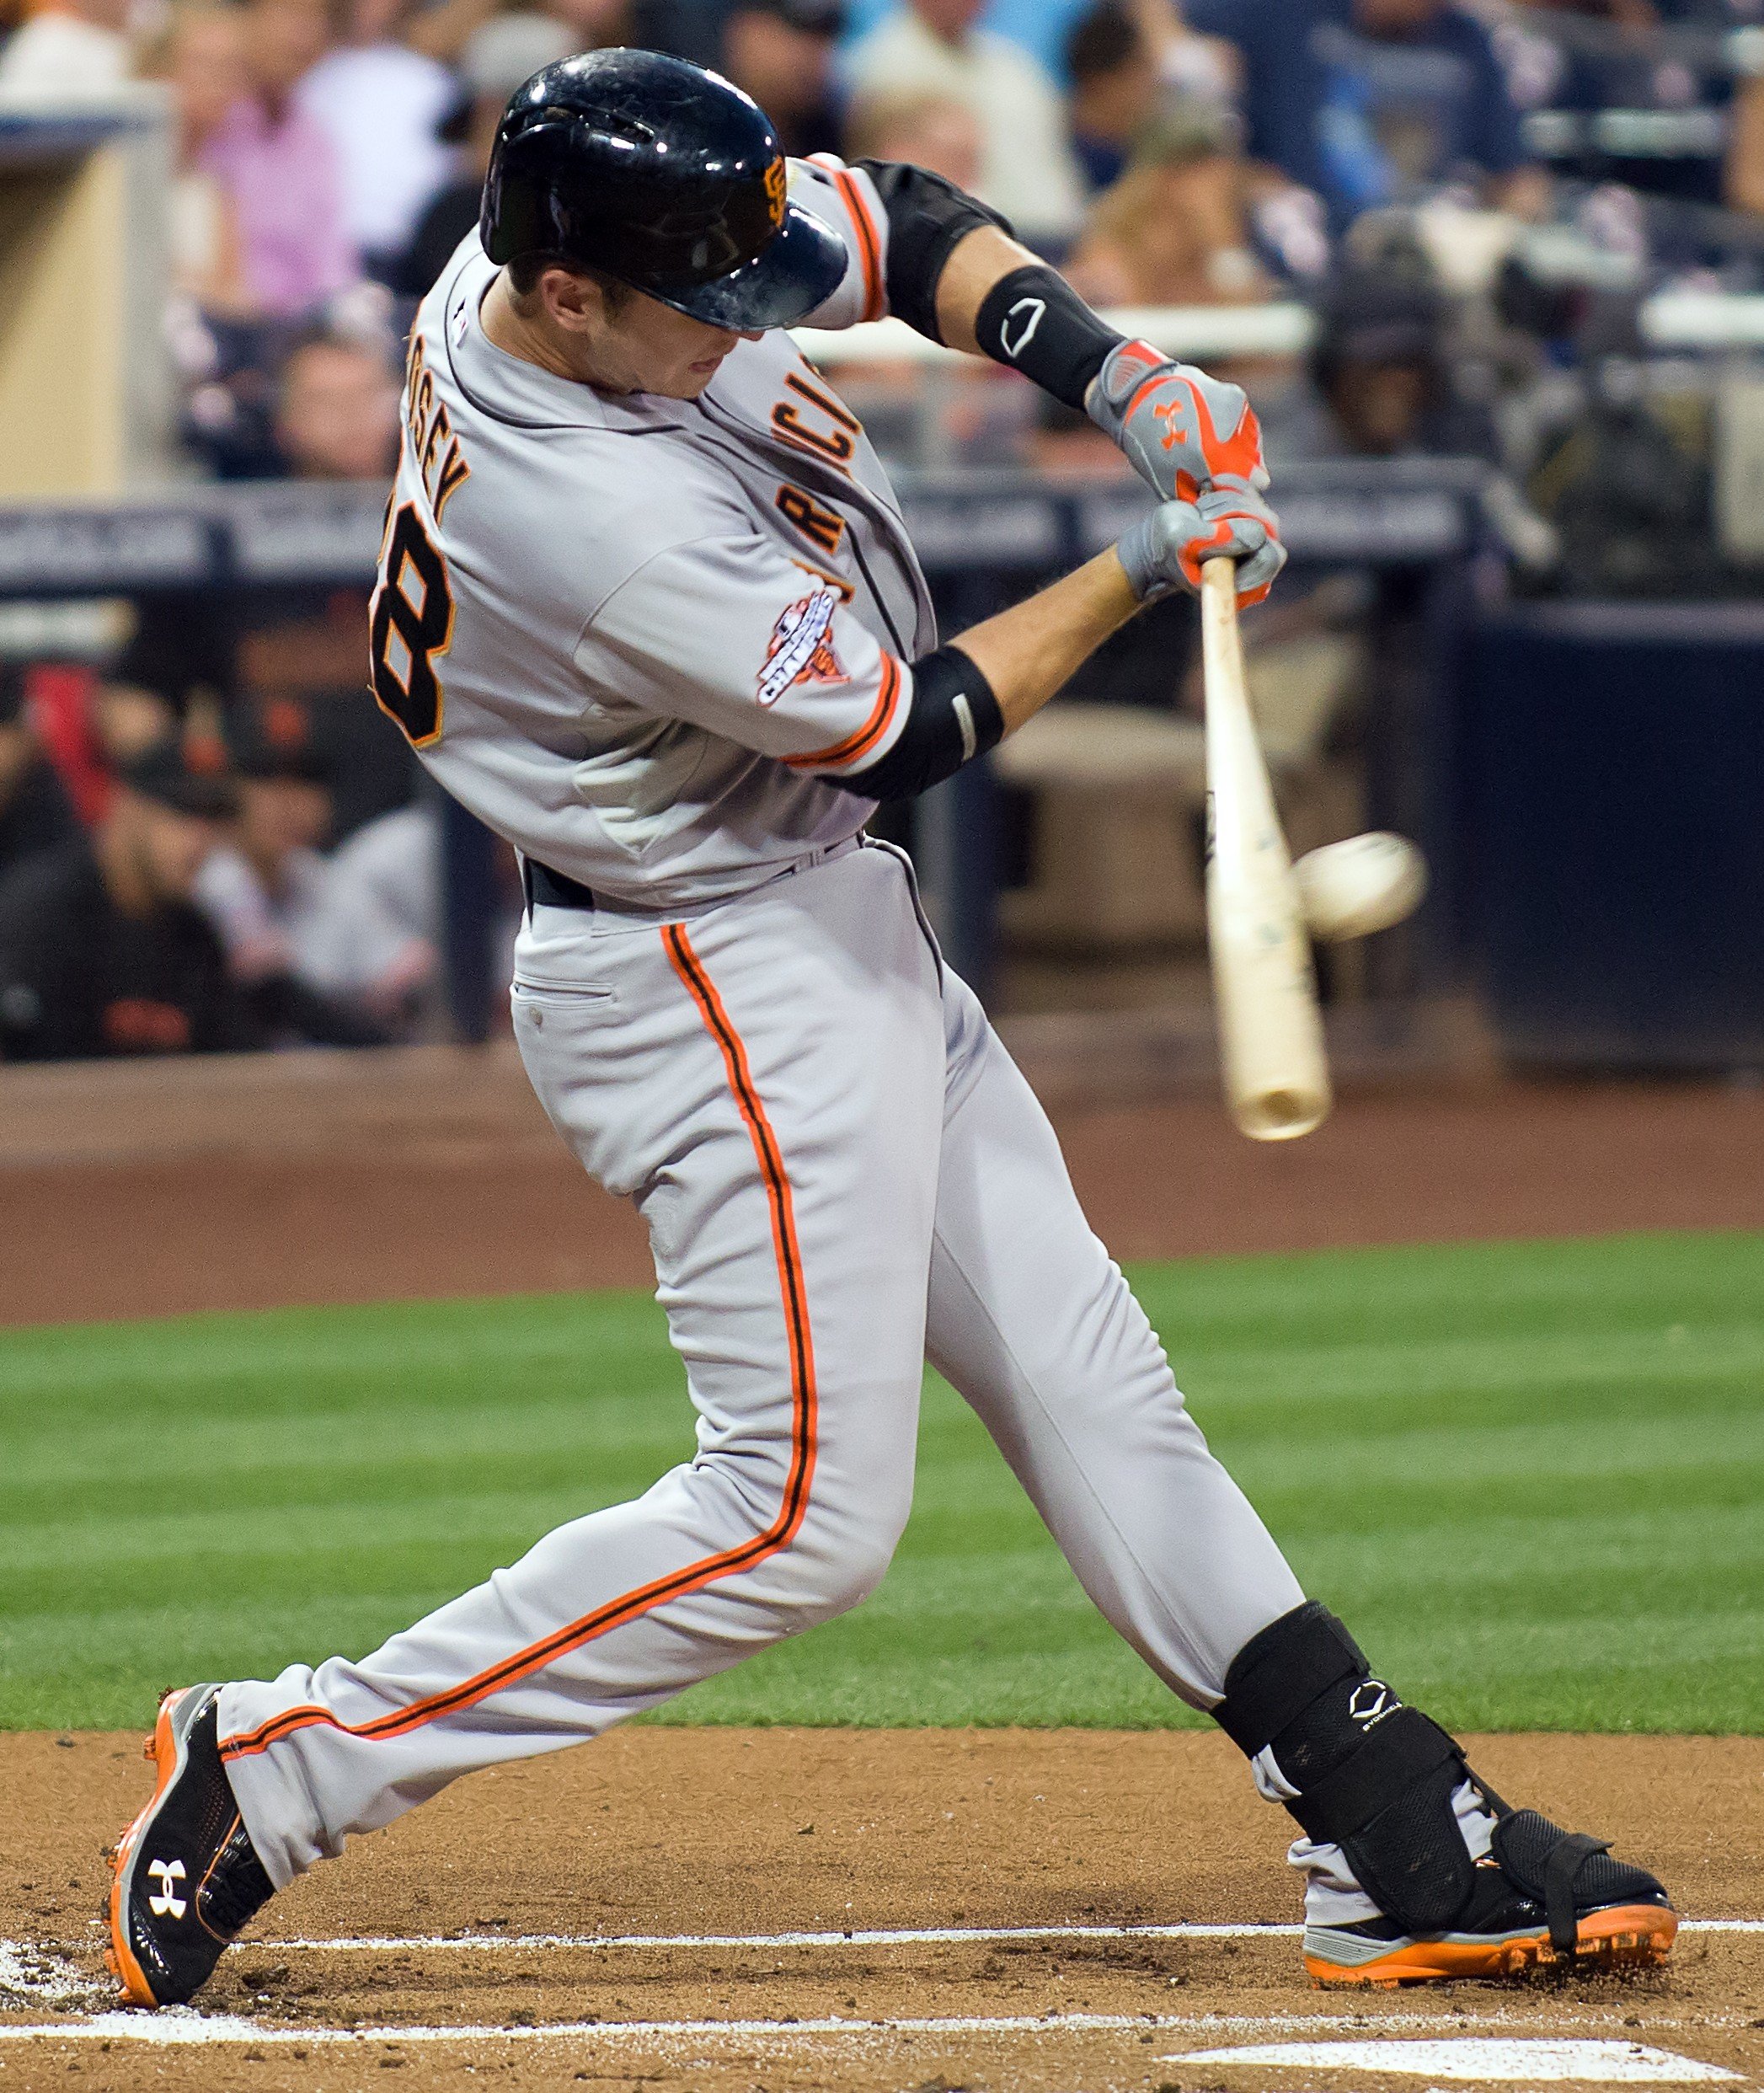 Buster Posey of the San Francisco Giants has managed to be a consistent hitter throughout his career by utilizing an approach  that features visual, mental and physical preparation.